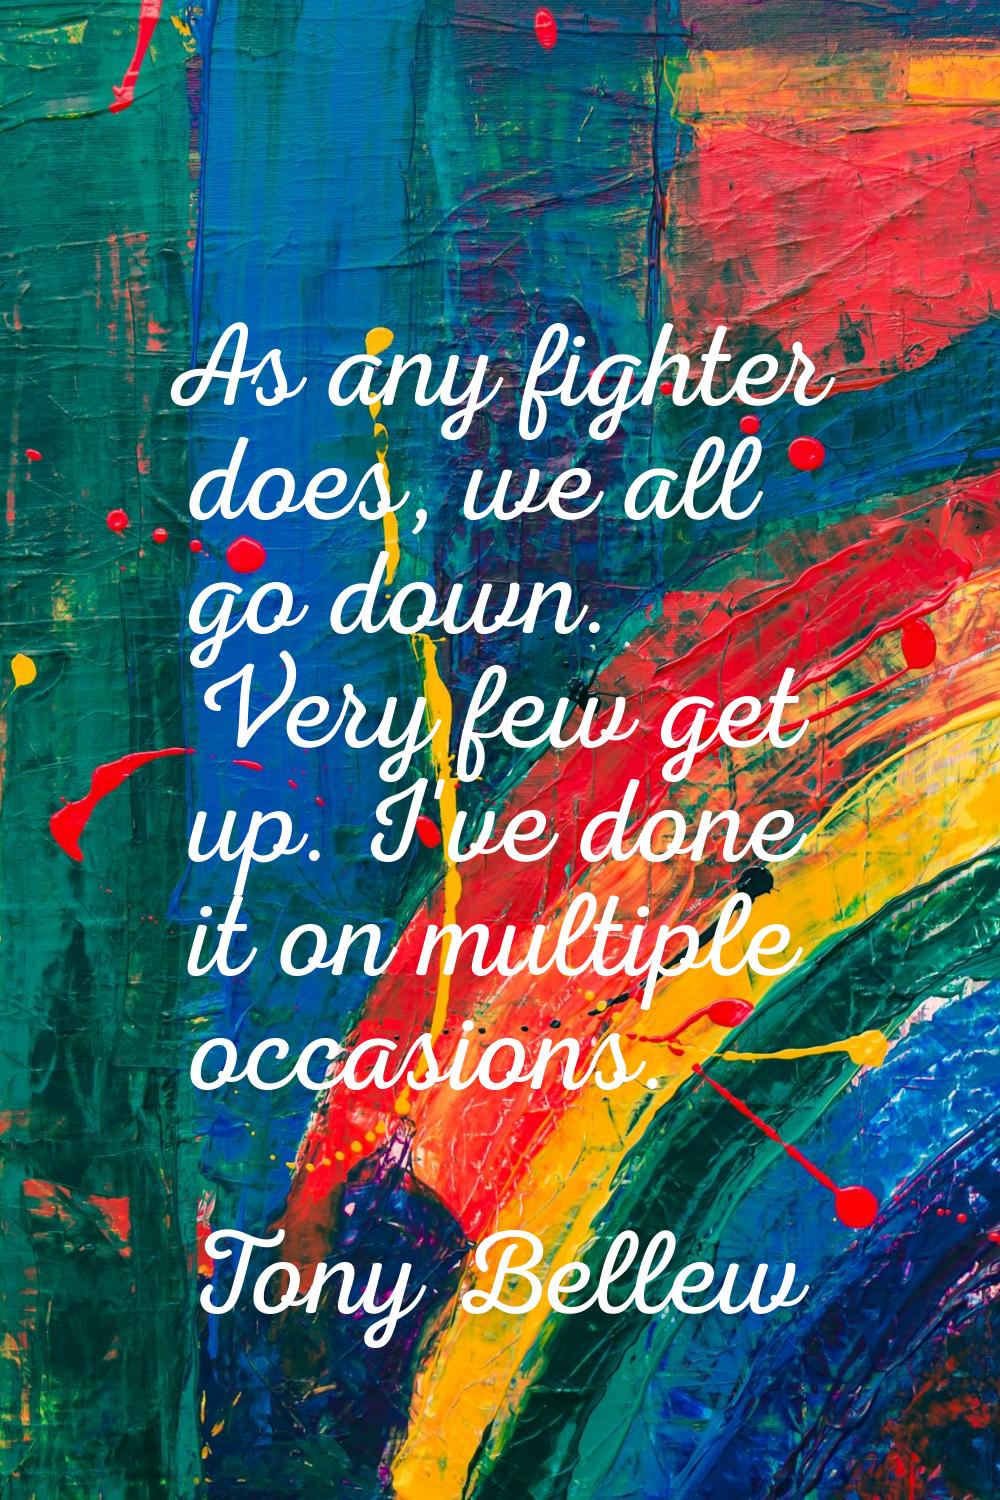 As any fighter does, we all go down. Very few get up. I've done it on multiple occasions.